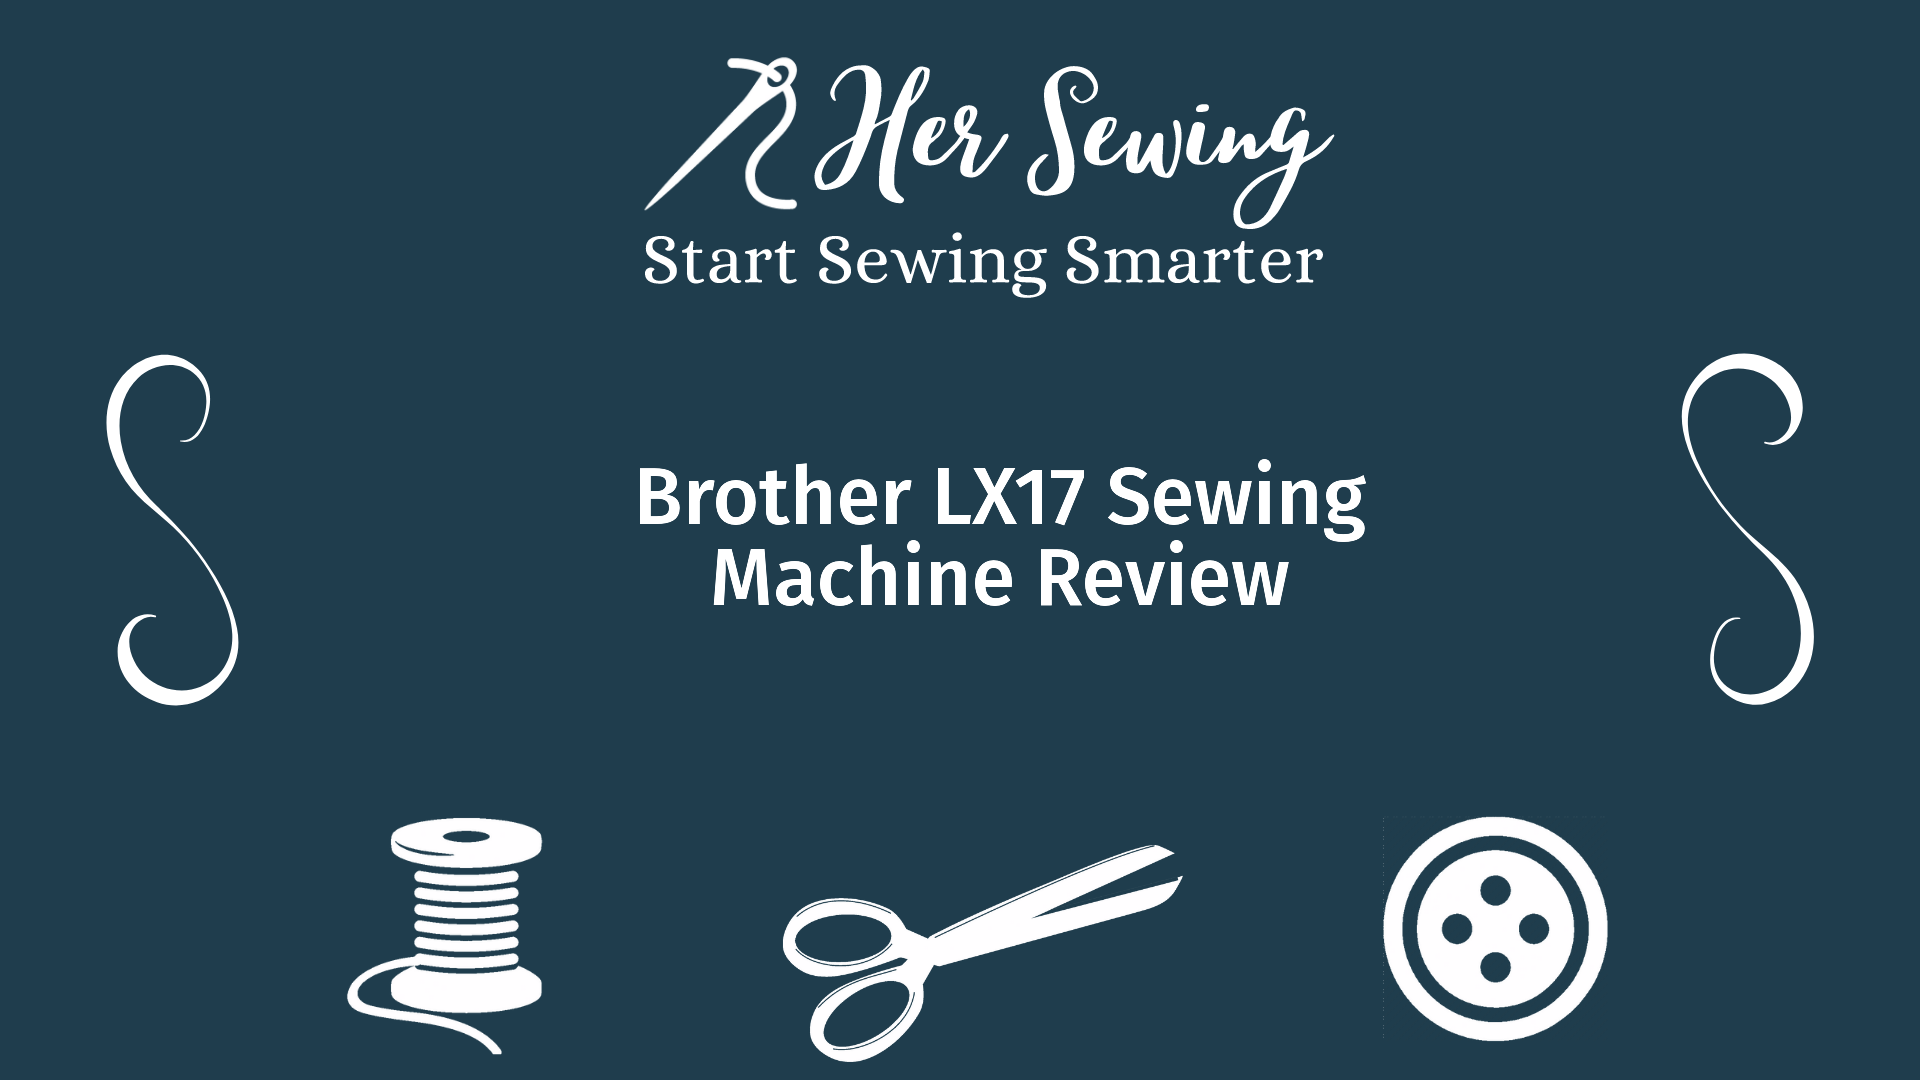 Brother LX17 Sewing Machine Review